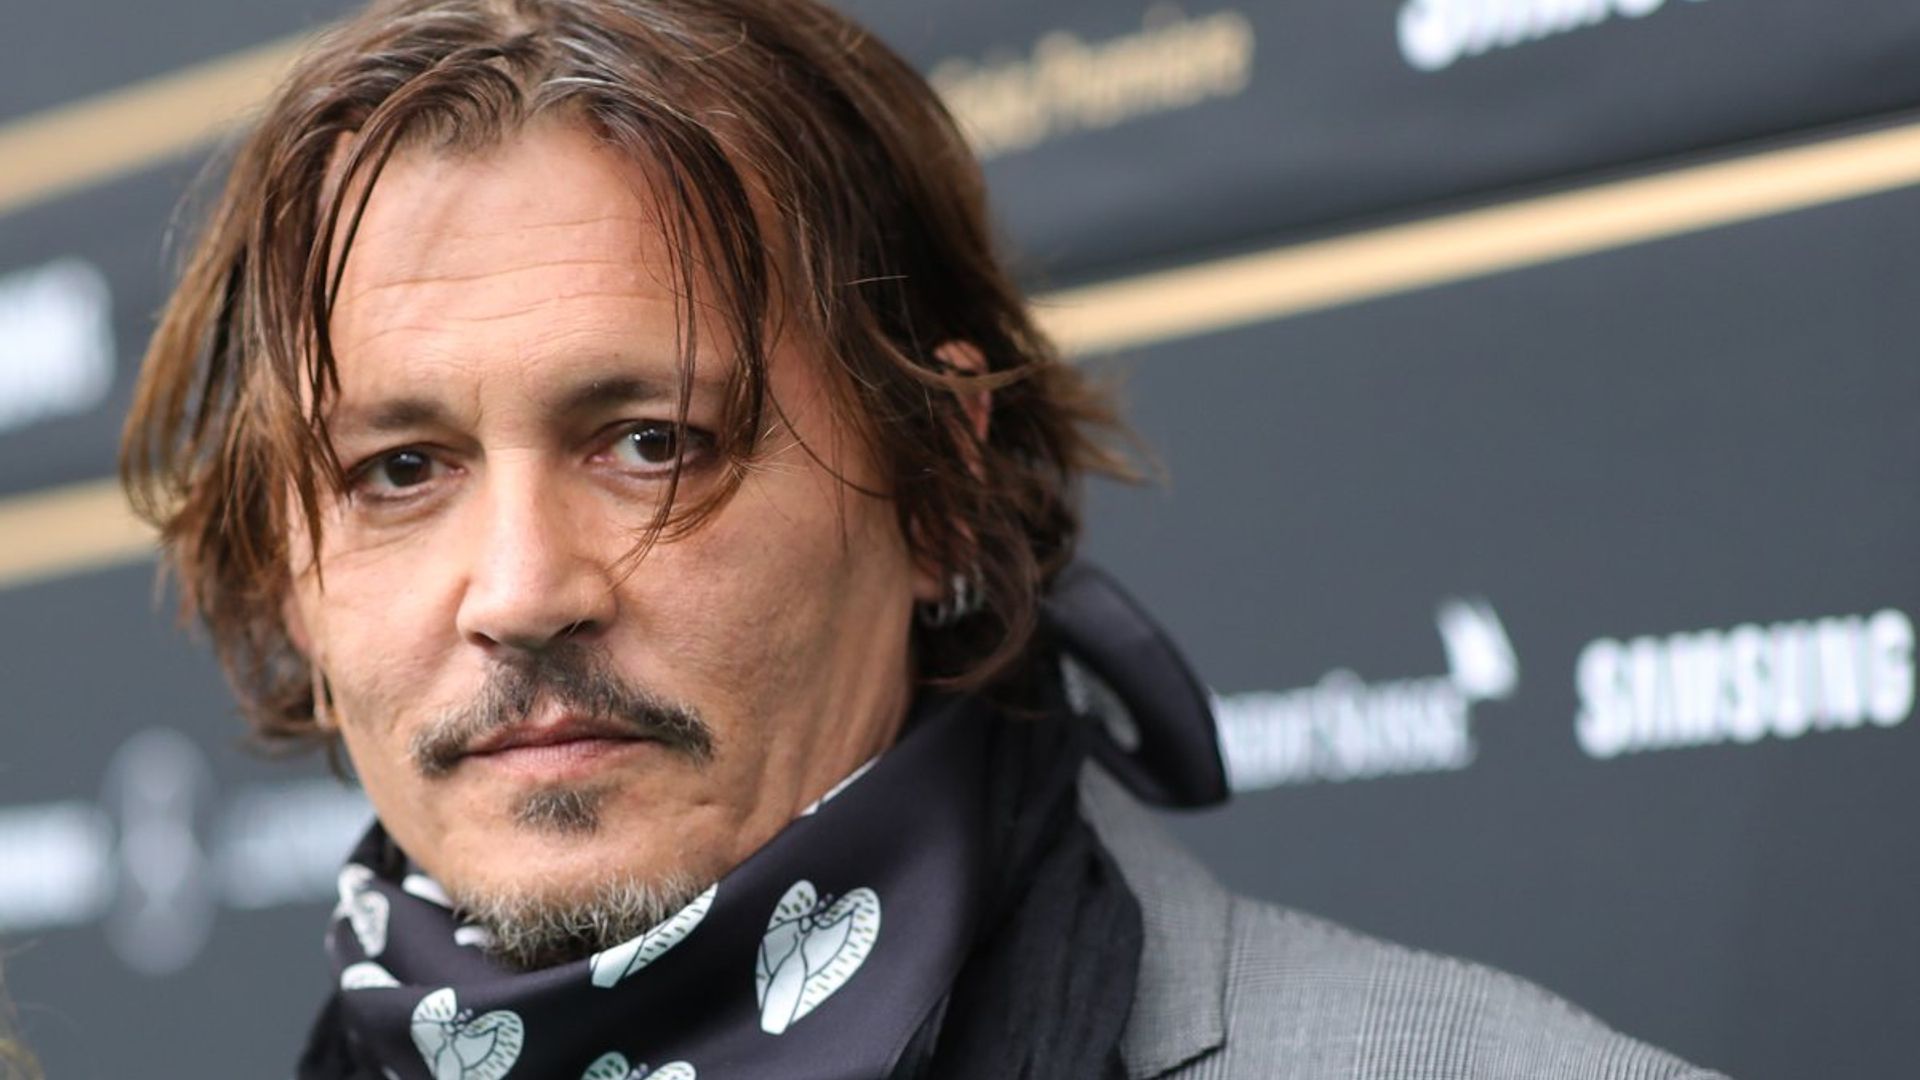 BREAKING: Johnny Depp quits Fantastic Beasts franchise at request of Warner Bros